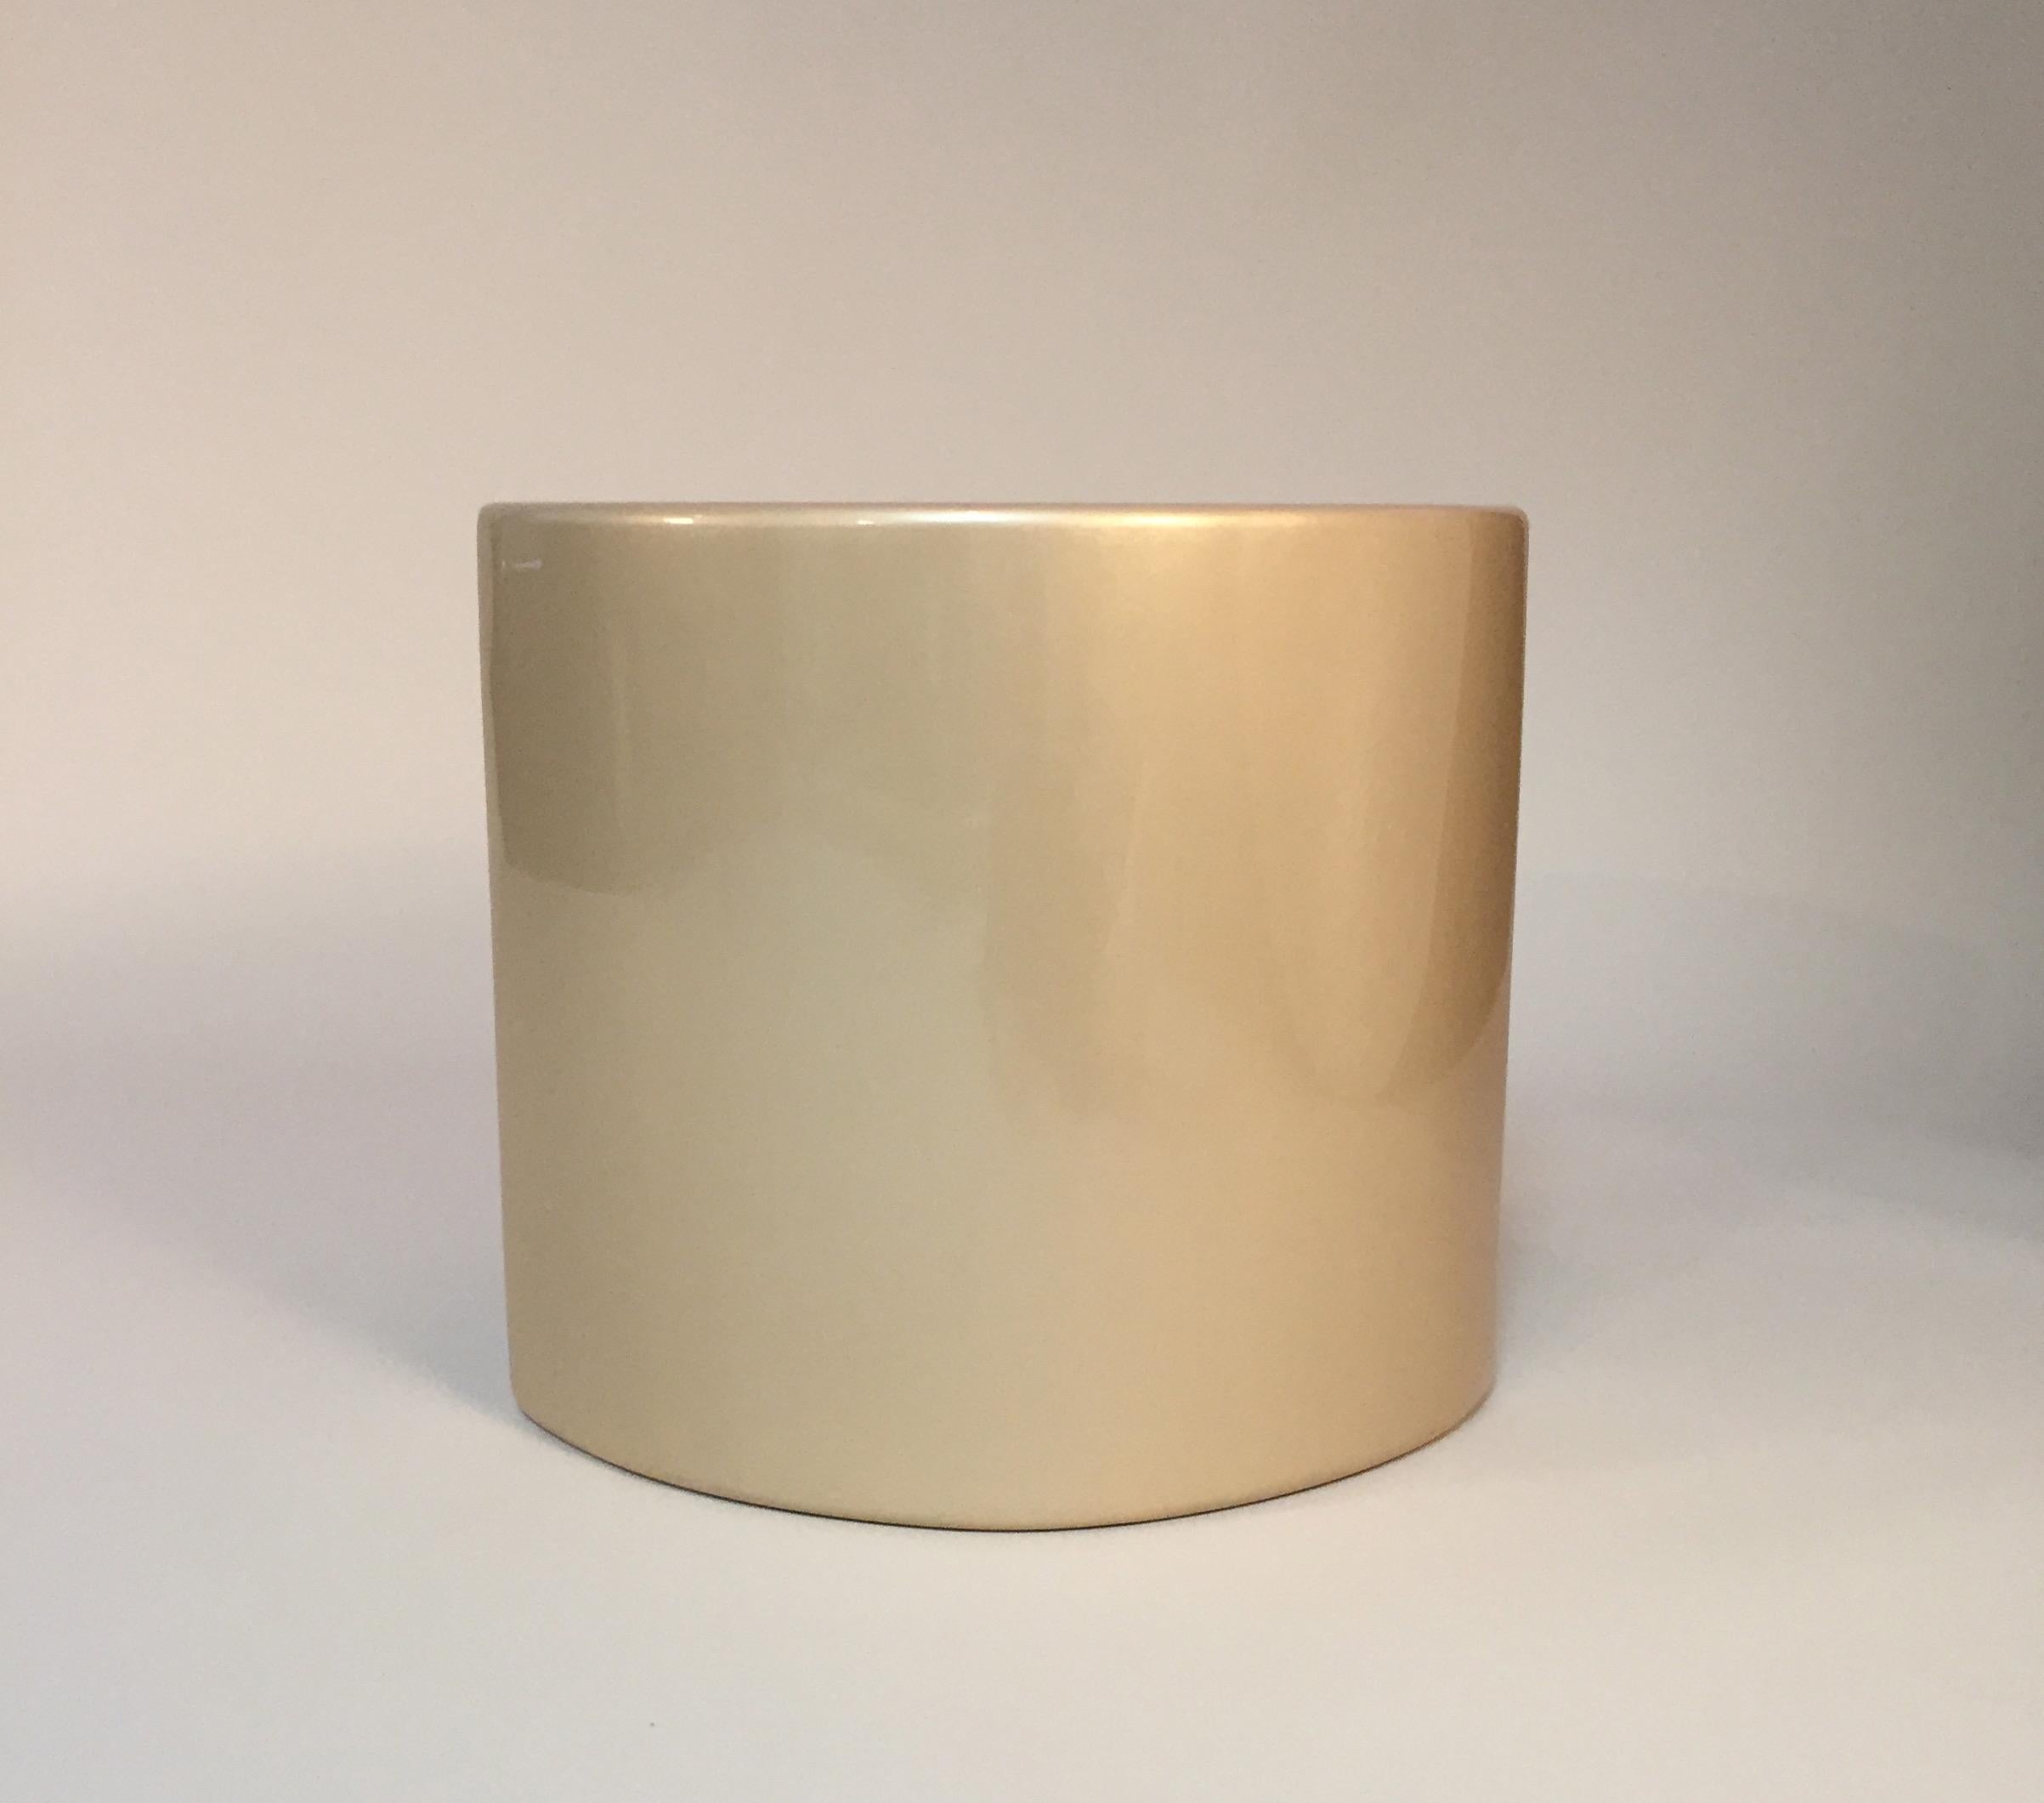 Lacquered Metallic Gold Gloss Lacquer Side Table Seat For Sale